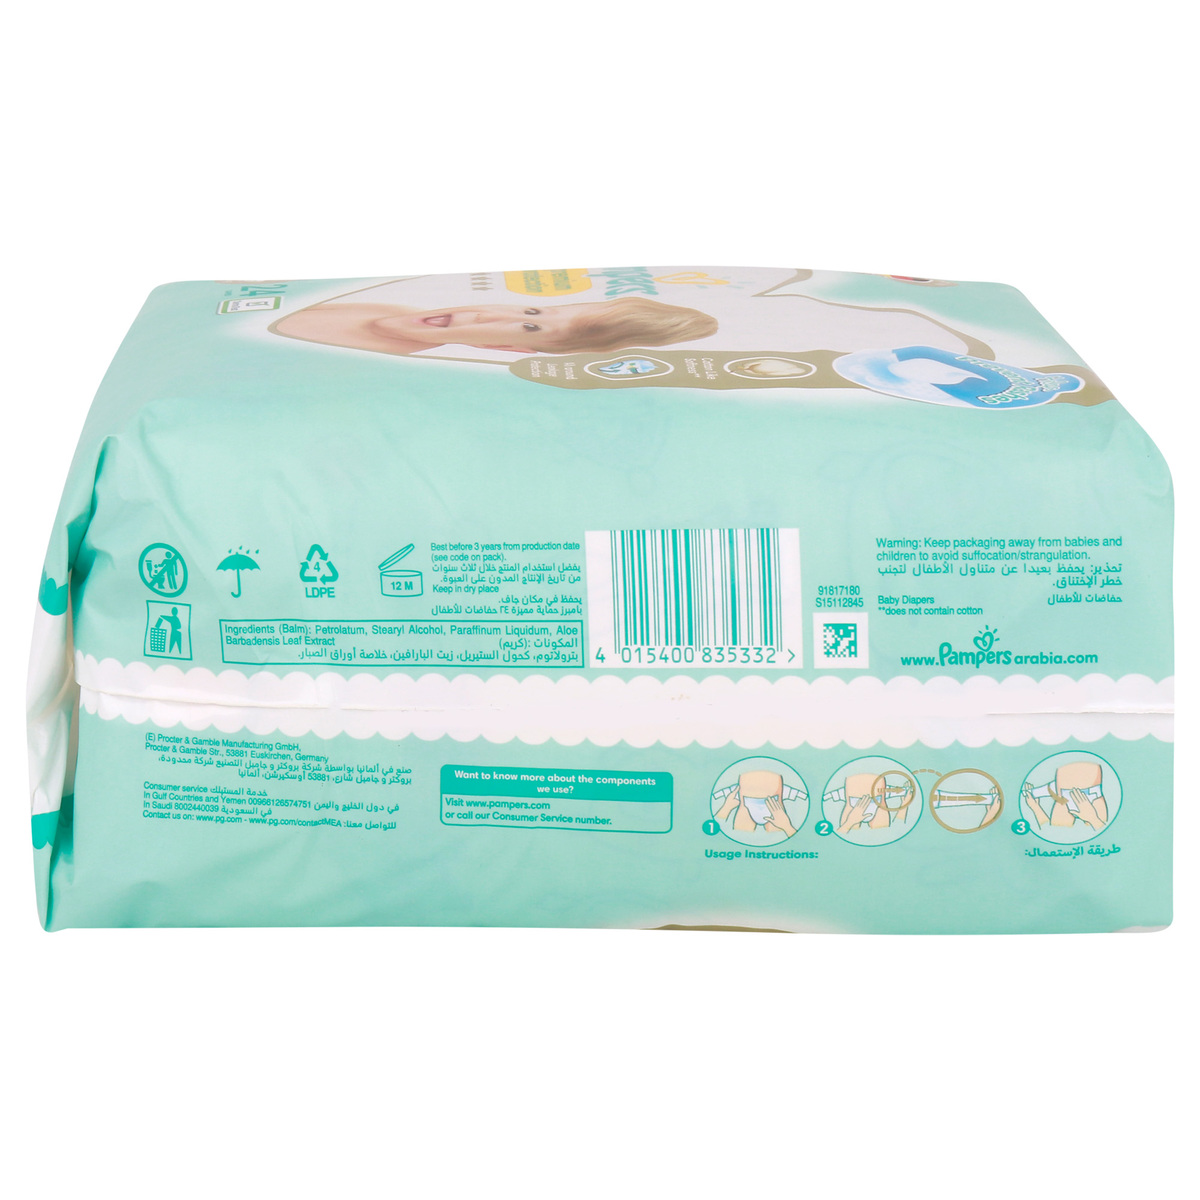 Pampers Premium Baby Diapers Size 4, 9-14kg 24pcs